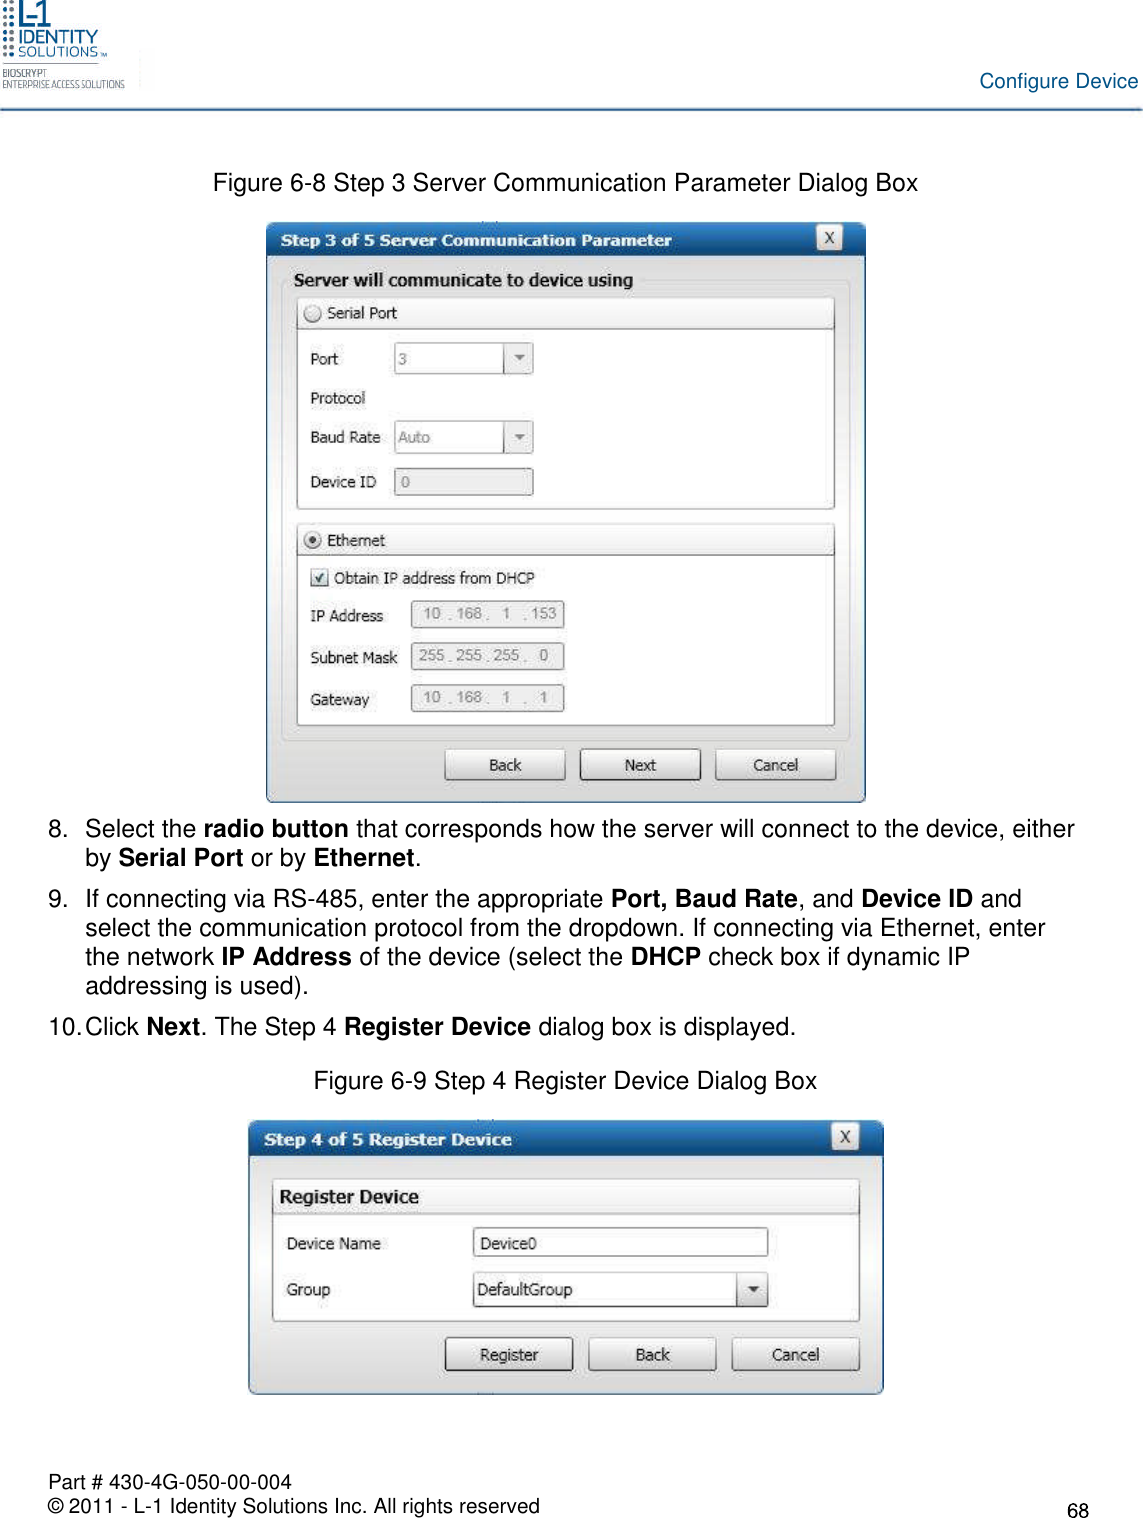 Part # 430-4G-050-00-004© 2011 - L-1 Identity Solutions Inc. All rights reservedConfigure DeviceFigure 6-8 Step 3 Server Communication Parameter Dialog Box8. Select the radio button that corresponds how the server will connect to the device, eitherby Serial Port or by Ethernet.9. If connecting via RS-485, enter the appropriate Port, Baud Rate, and Device ID andselect the communication protocol from the dropdown. If connecting via Ethernet, enterthe network IP Address of the device (select the DHCP check box if dynamic IPaddressing is used).10.Click Next. The Step 4 Register Device dialog box is displayed.Figure 6-9 Step 4 Register Device Dialog Box